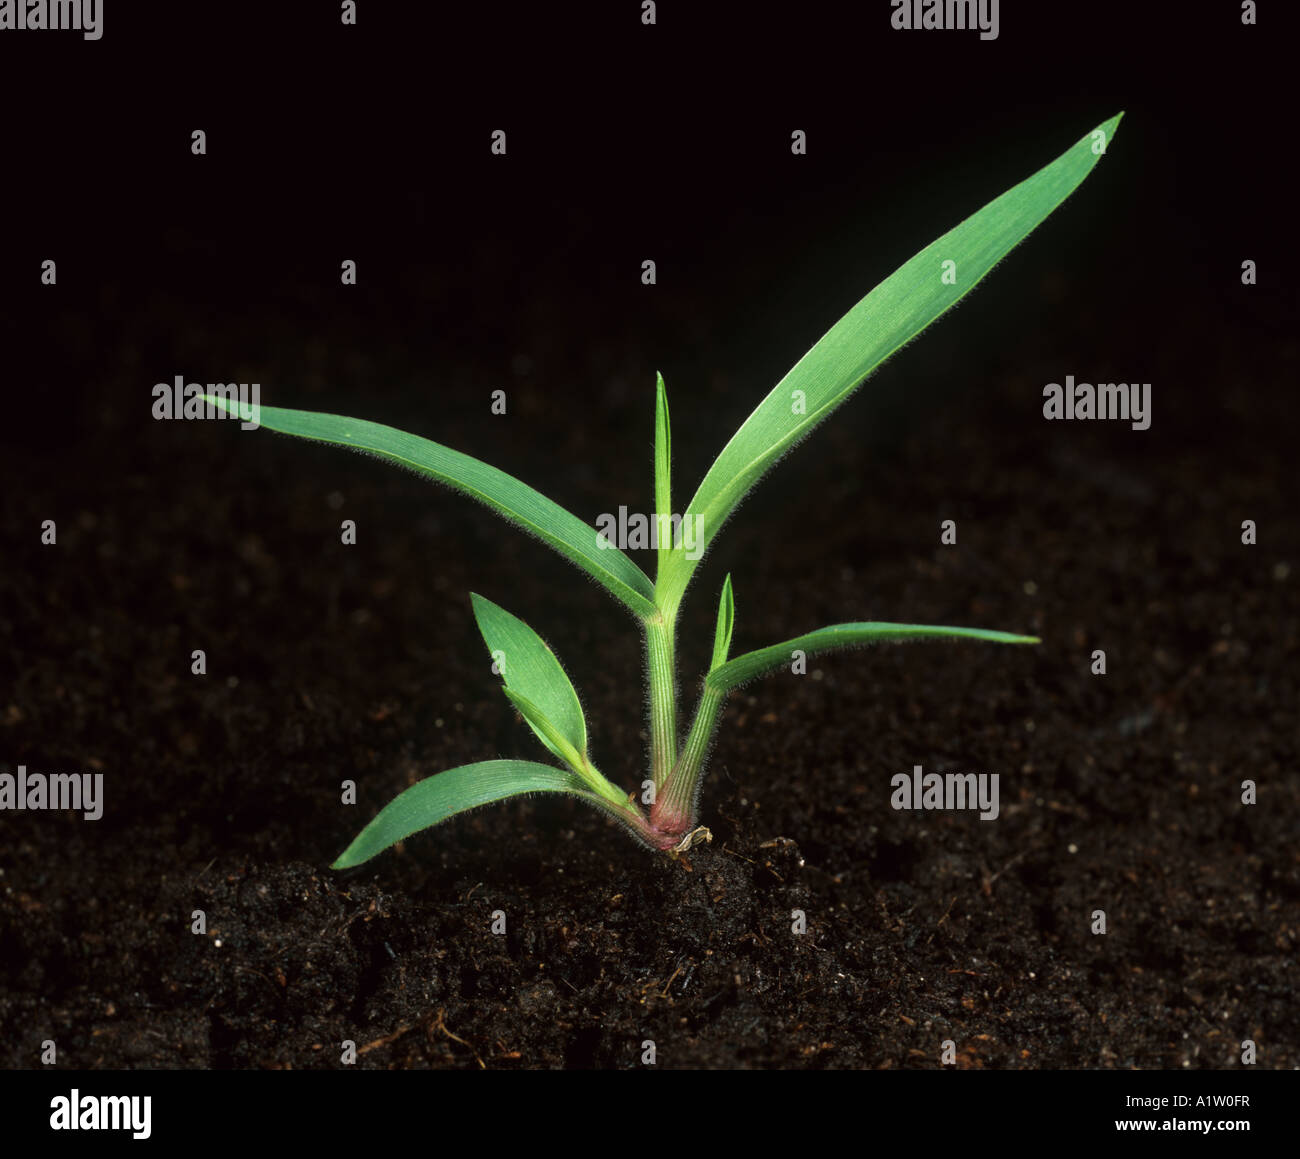 Mossmon rivergrass Cenchrus echinatus seedling plant with two small tillers Stock Photo